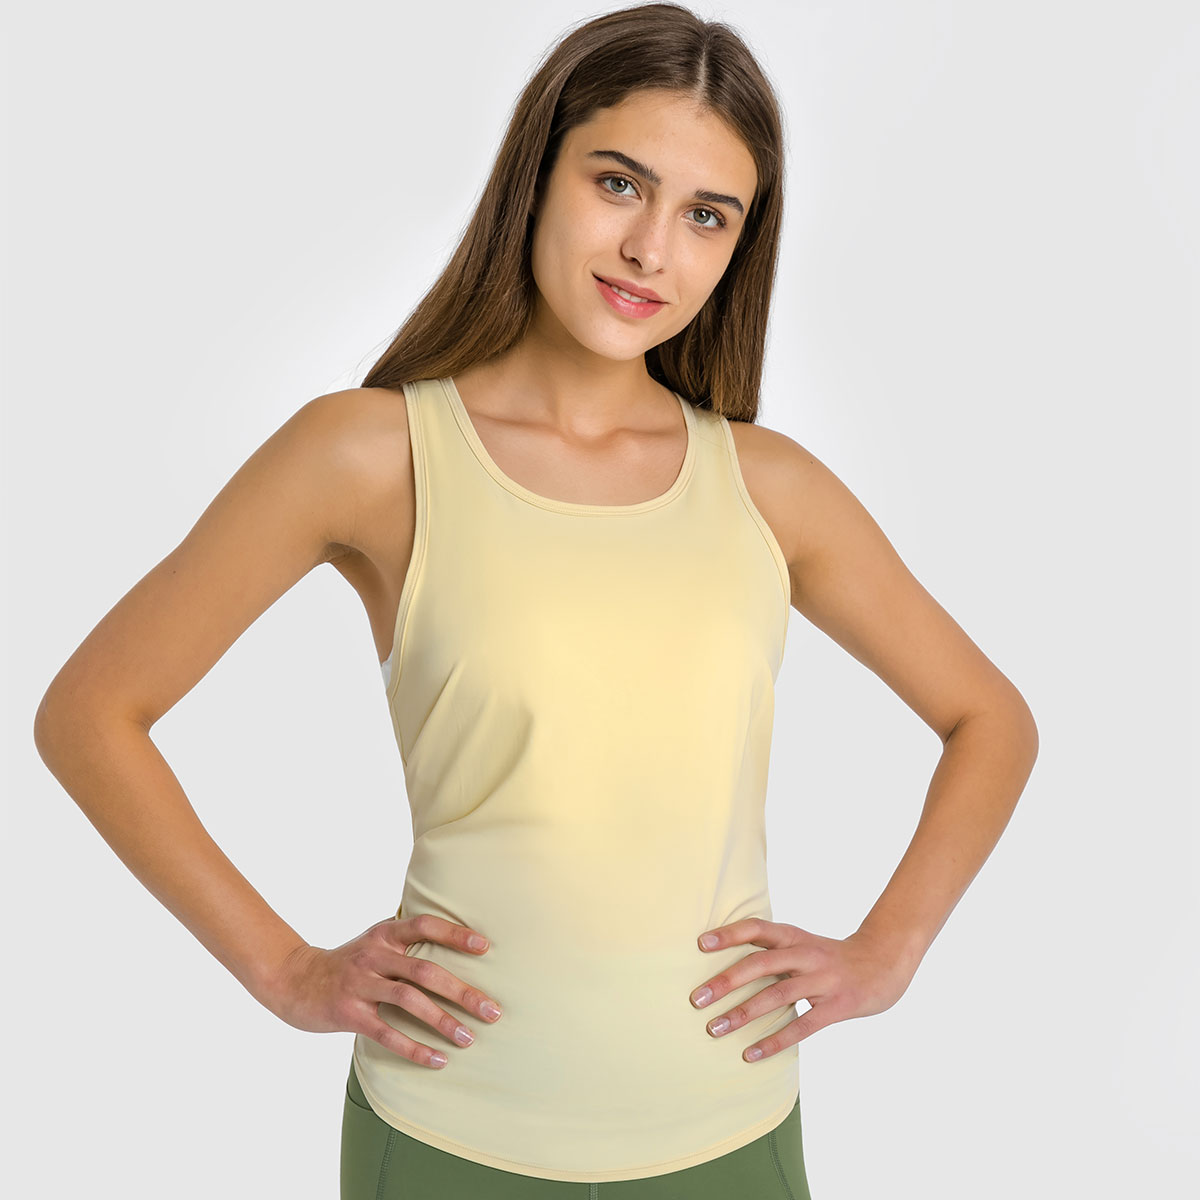 Hergymclothing yellow sports crop vests online shopping